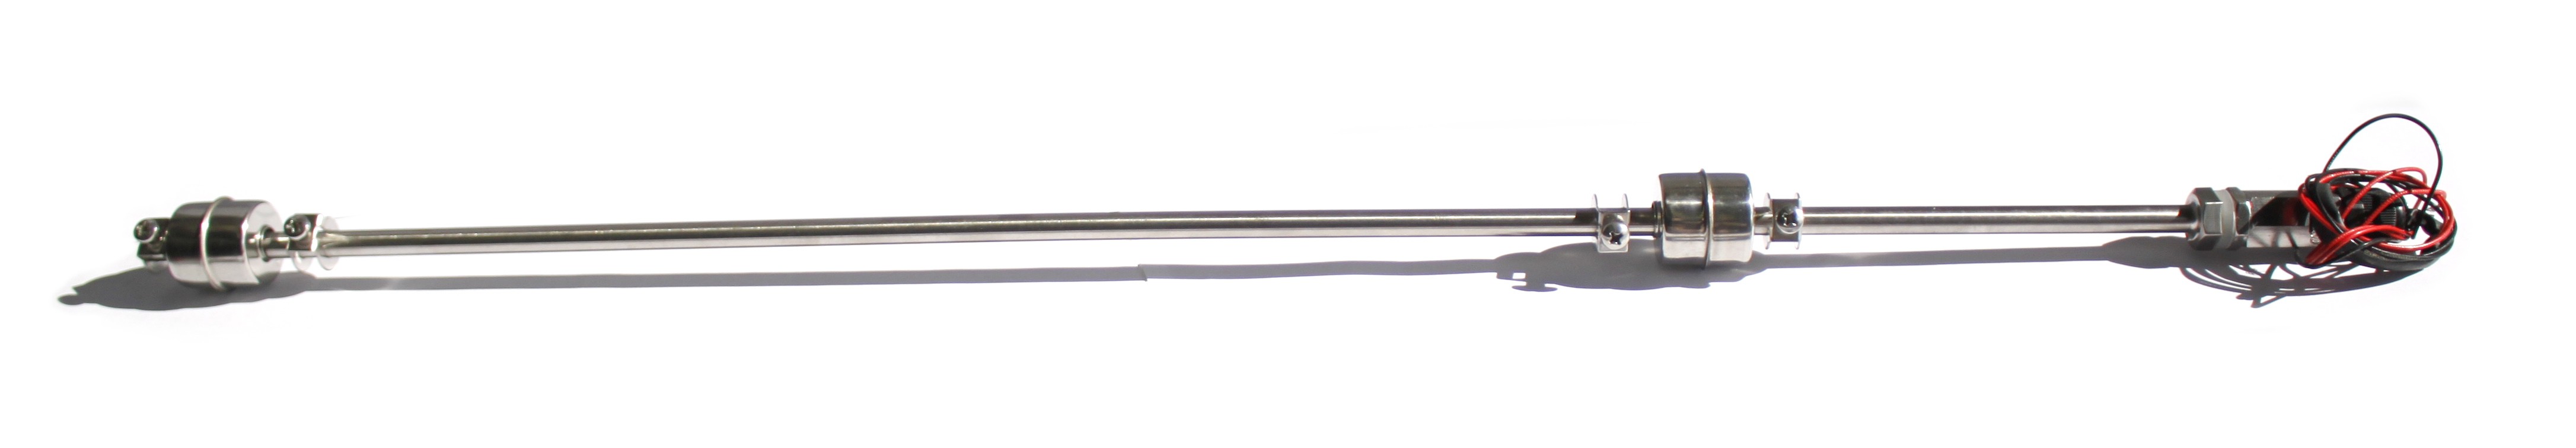 Adjustable Vertically Mounted 600mm Dual Float Switch